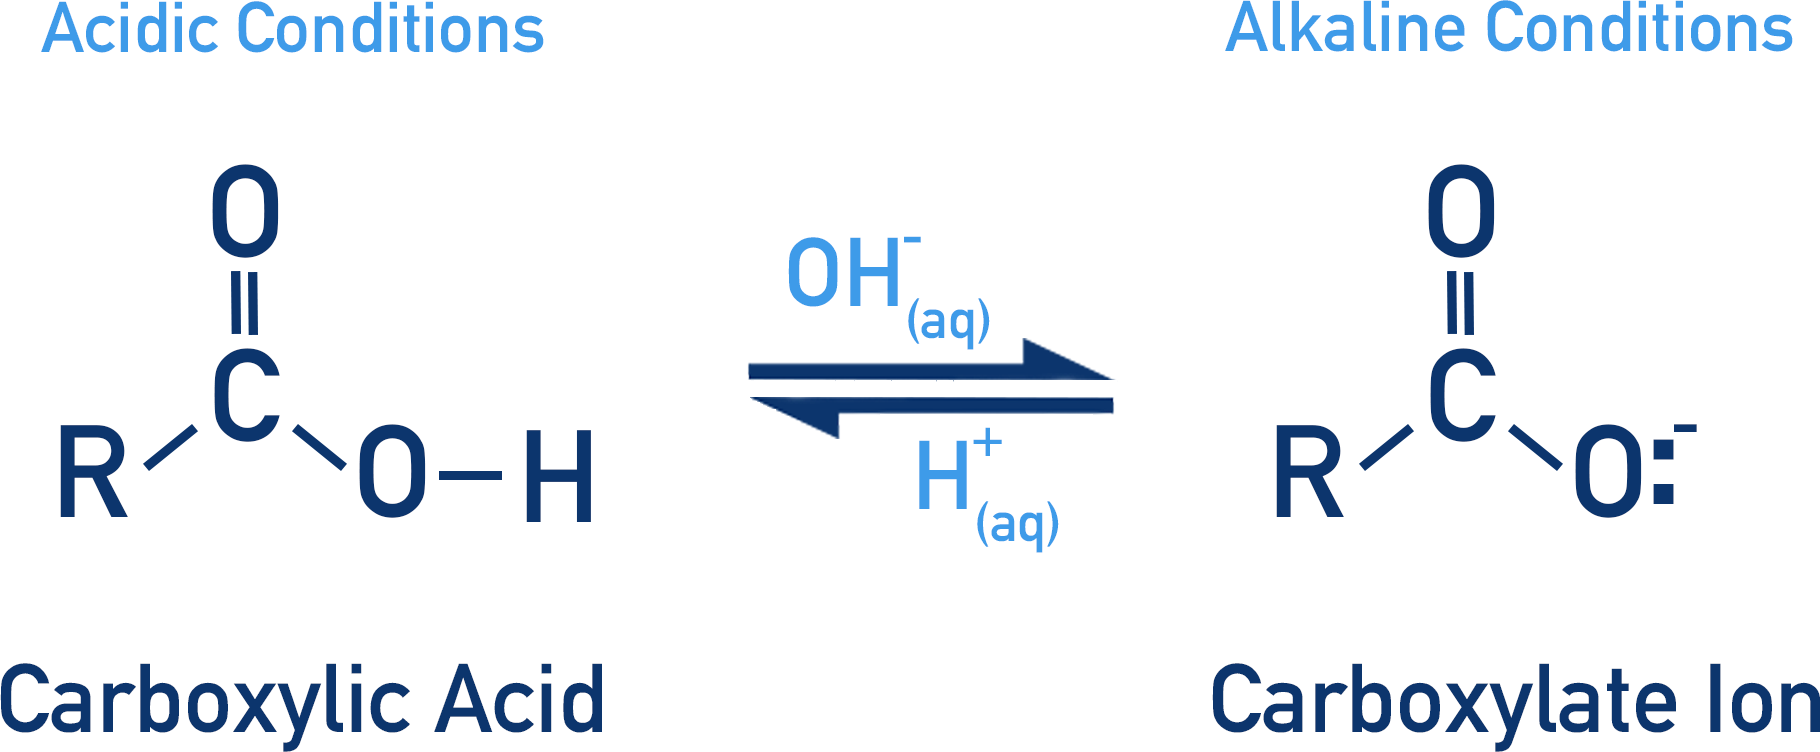 carboxylic acid in acidic or alkaline conditions